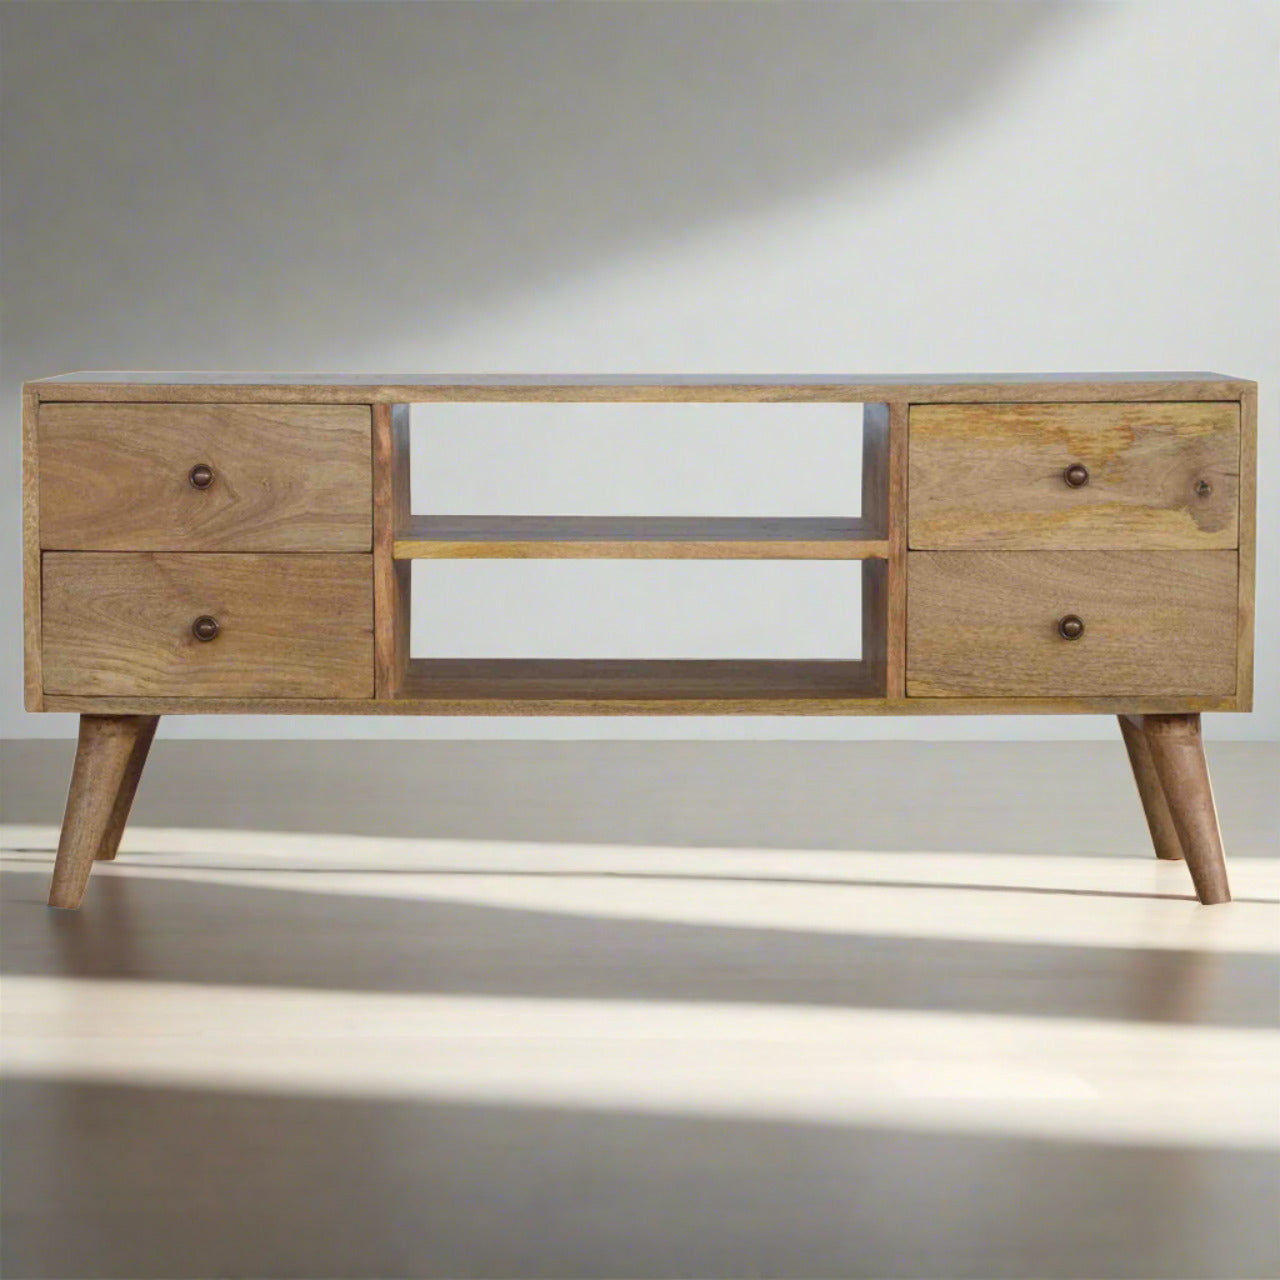 Nordic wooden TV stand with 4 drawers in rustic natural oak-ish finish | malletandplane.com